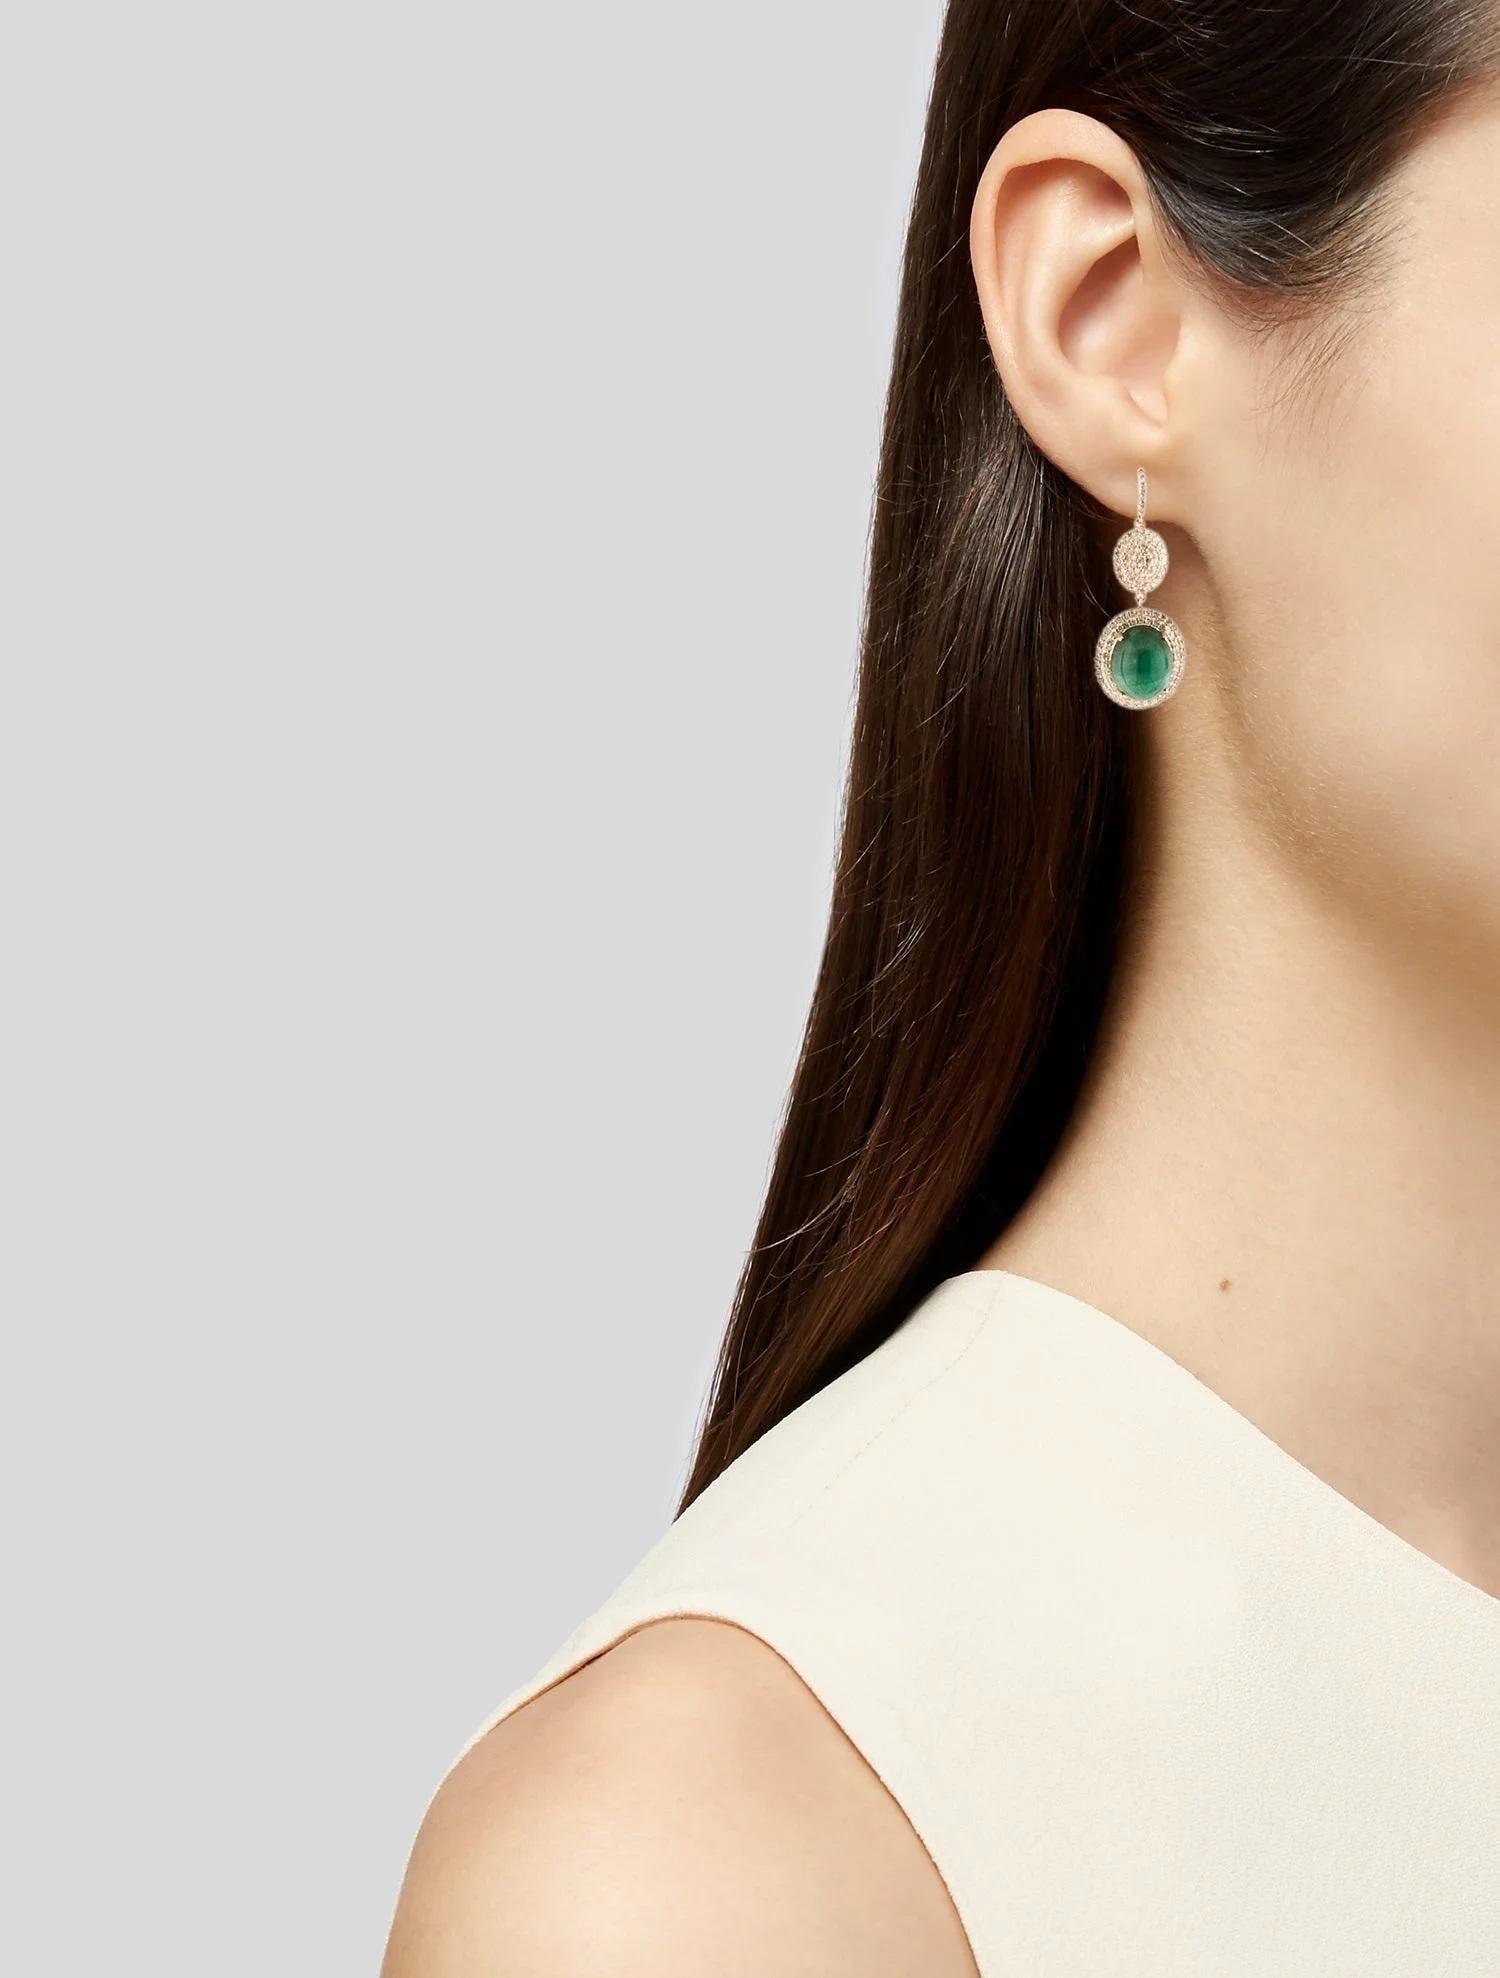 Elevate your look with these breathtaking 14K yellow gold drop earrings featuring stunning cabochon oval emeralds and sparkling single-cut diamonds. The two captivating emeralds, totaling 10.00 carats, exhibit a rich green color with a very slightly